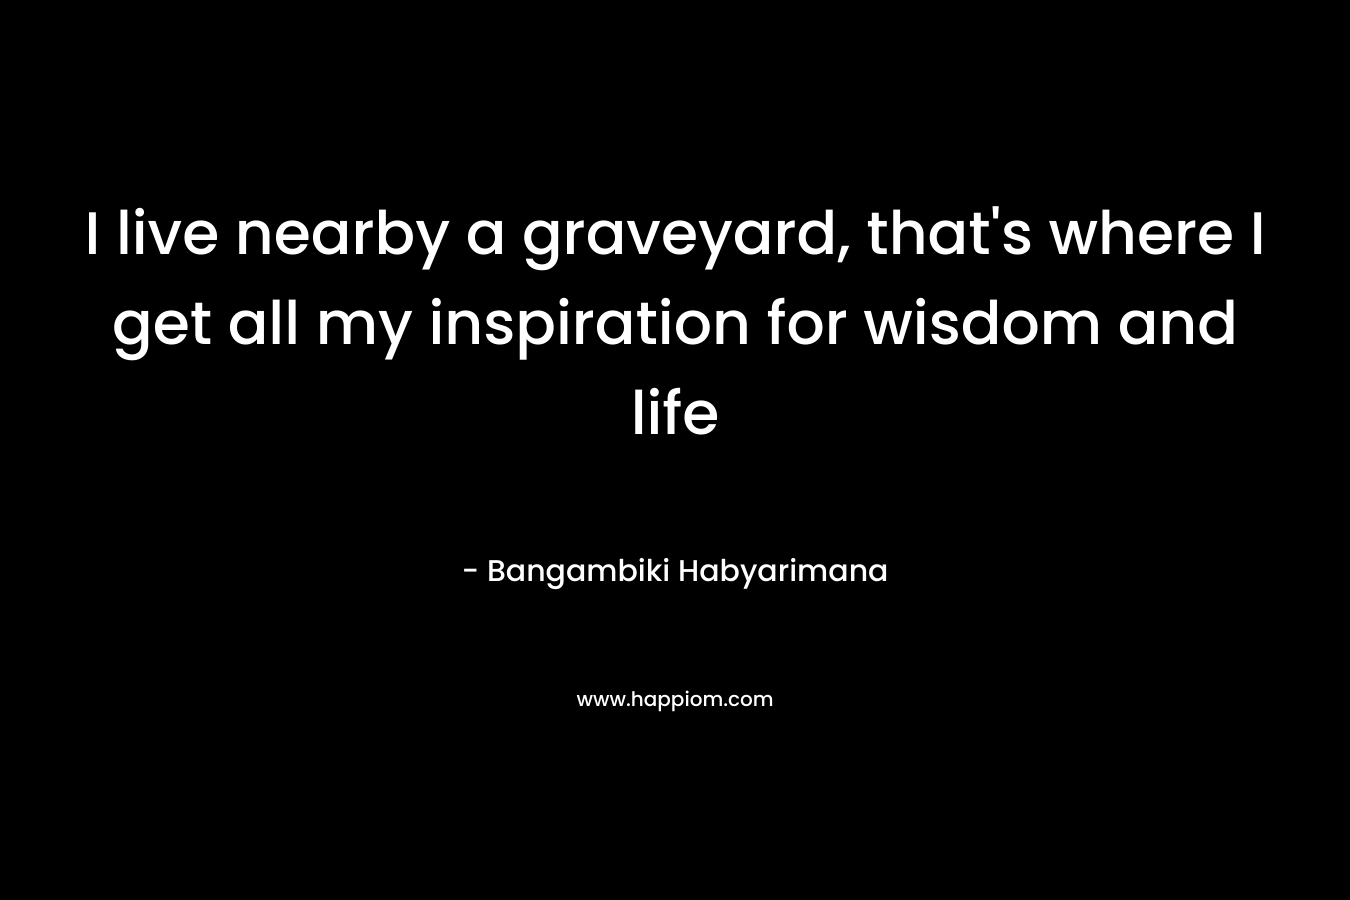 I live nearby a graveyard, that’s where I get all my inspiration for wisdom and life – Bangambiki Habyarimana